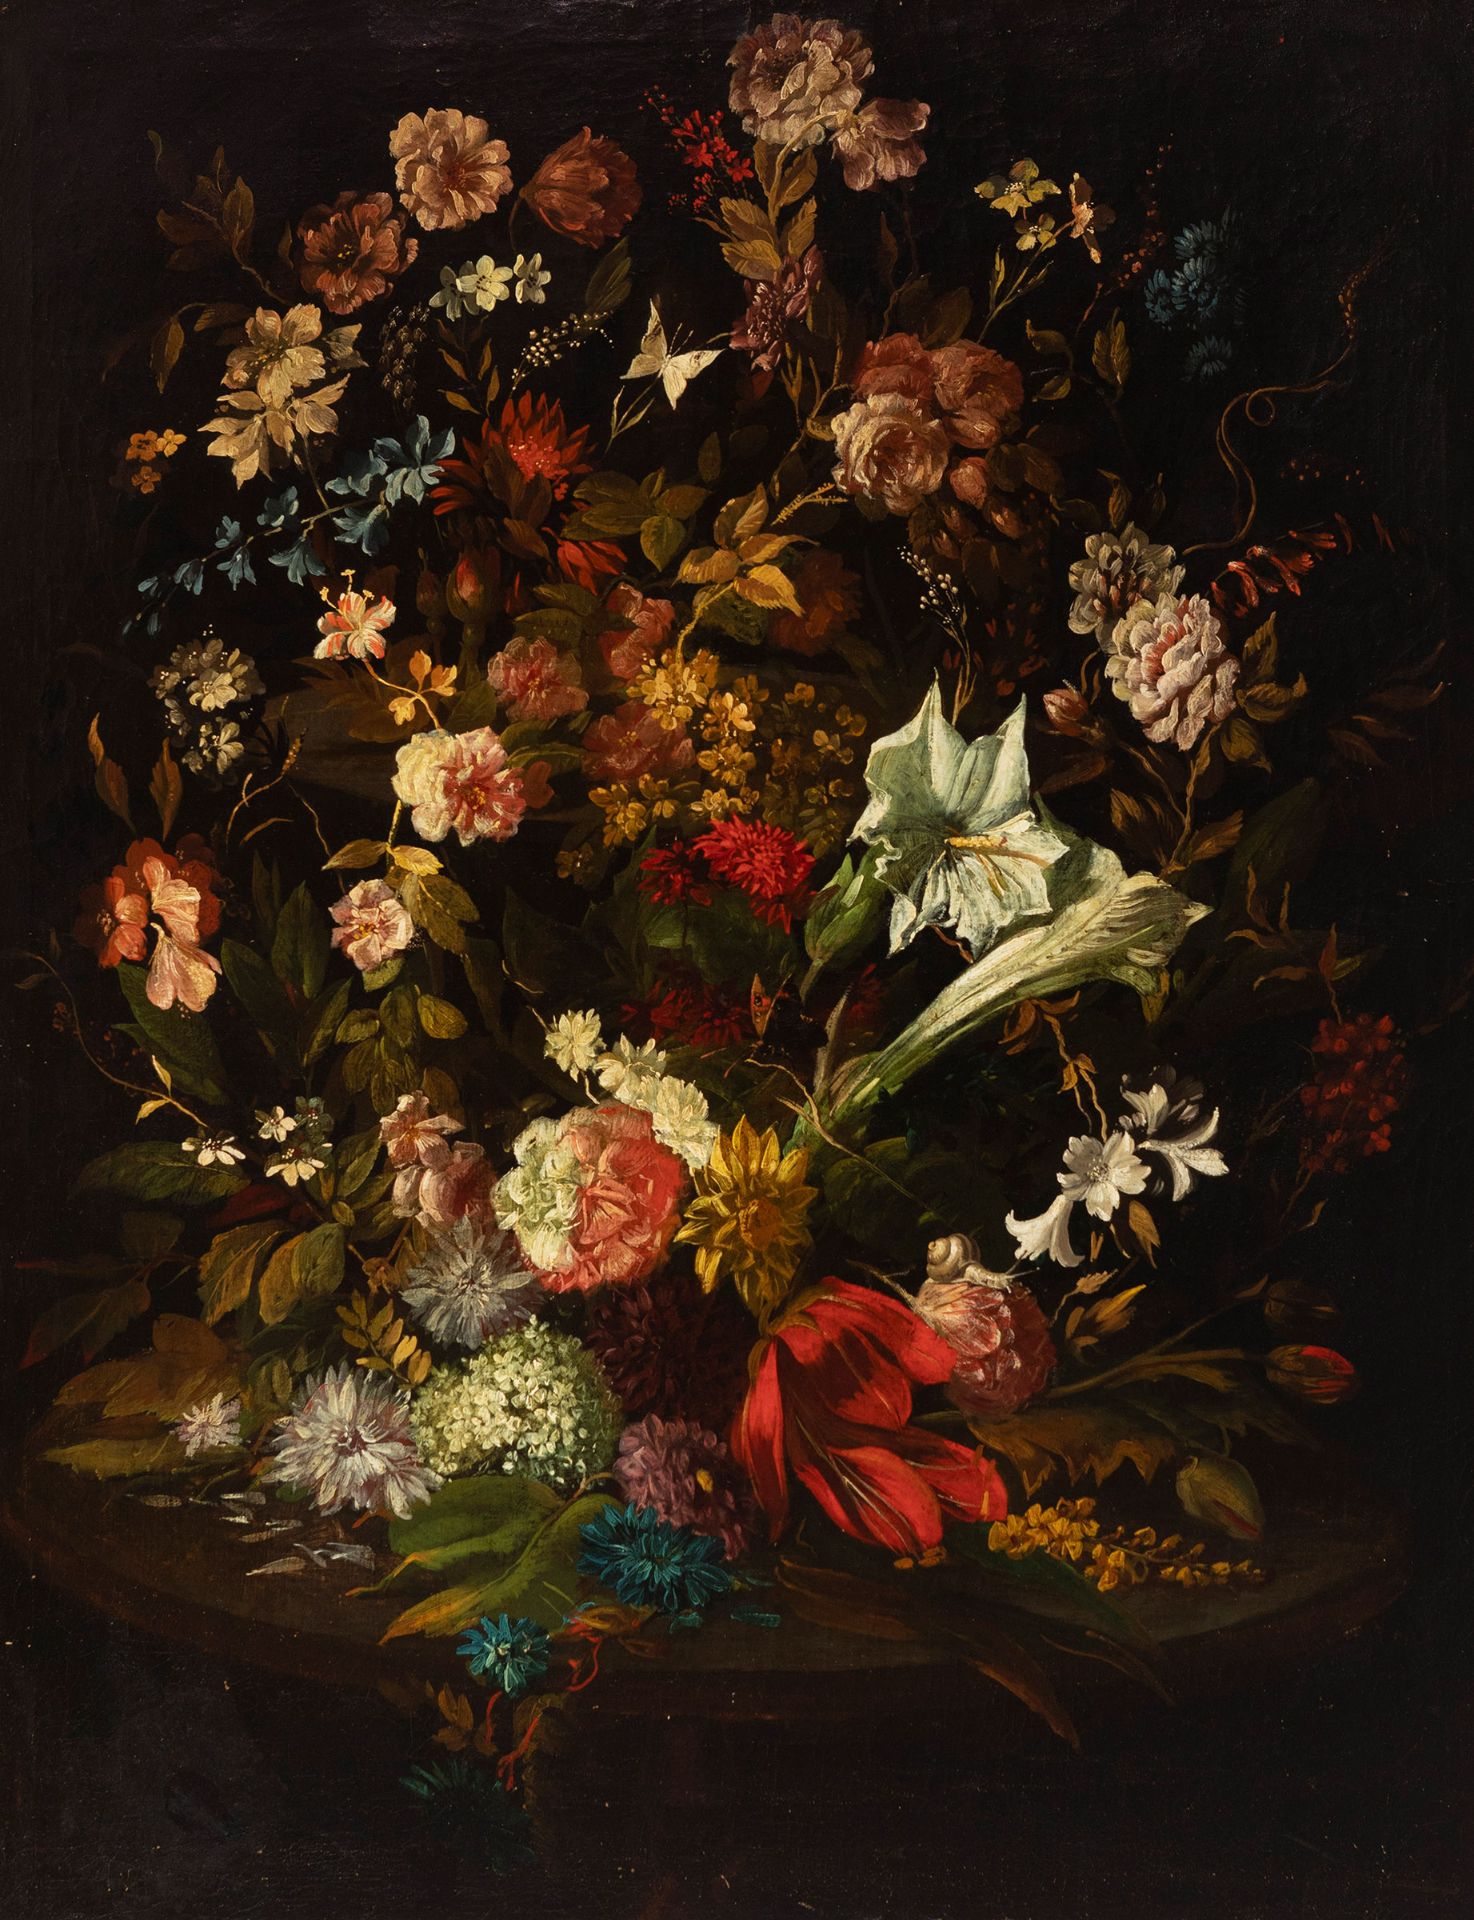 Spanish school of the 18th century."Still life with flowers".Oil on canvas.With frame ca. 1830.Size: